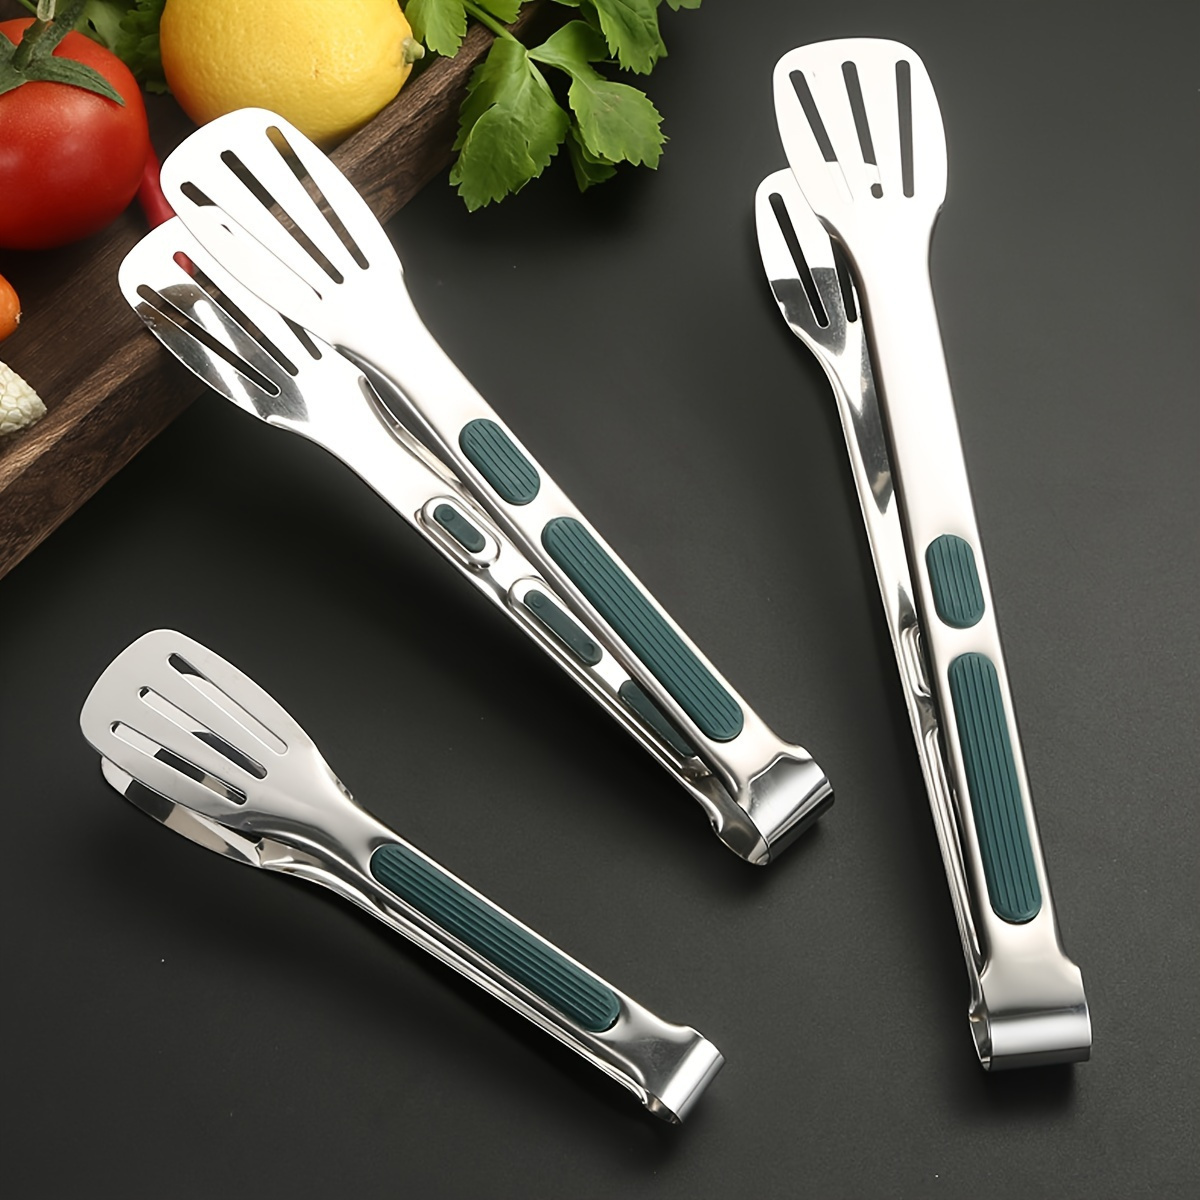 

3pcs/set Stainless Steel Food Tongs, Non-slip Meat Salad Bread Serving Clip, Barbecue Grill Buffet Clamp, Cooking Tools, Kitchen Accessories